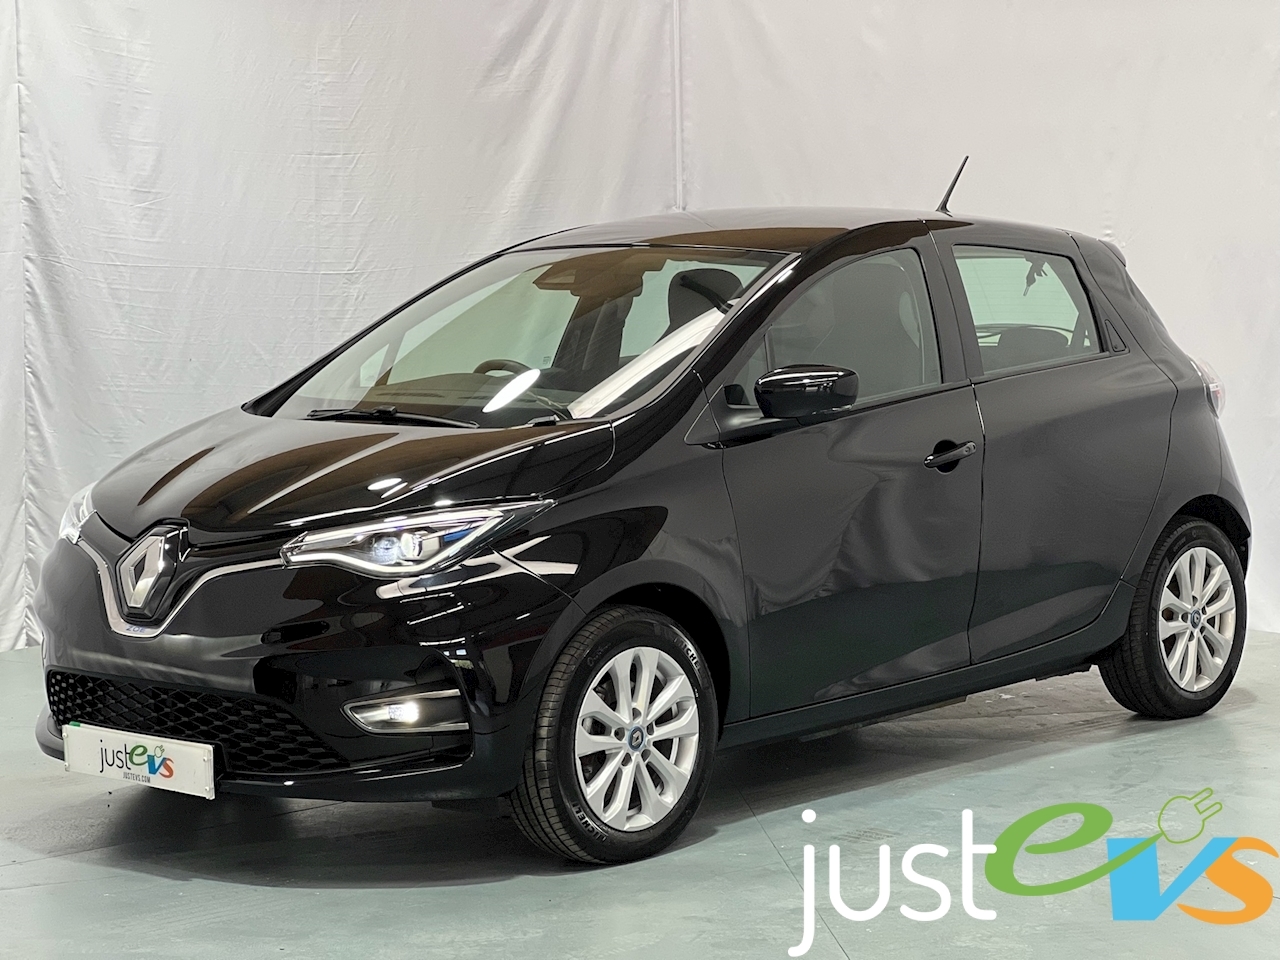 R135 52kWh Iconic Hatchback 5dr Electric Auto (i, Rapid Charge) (134 bhp)